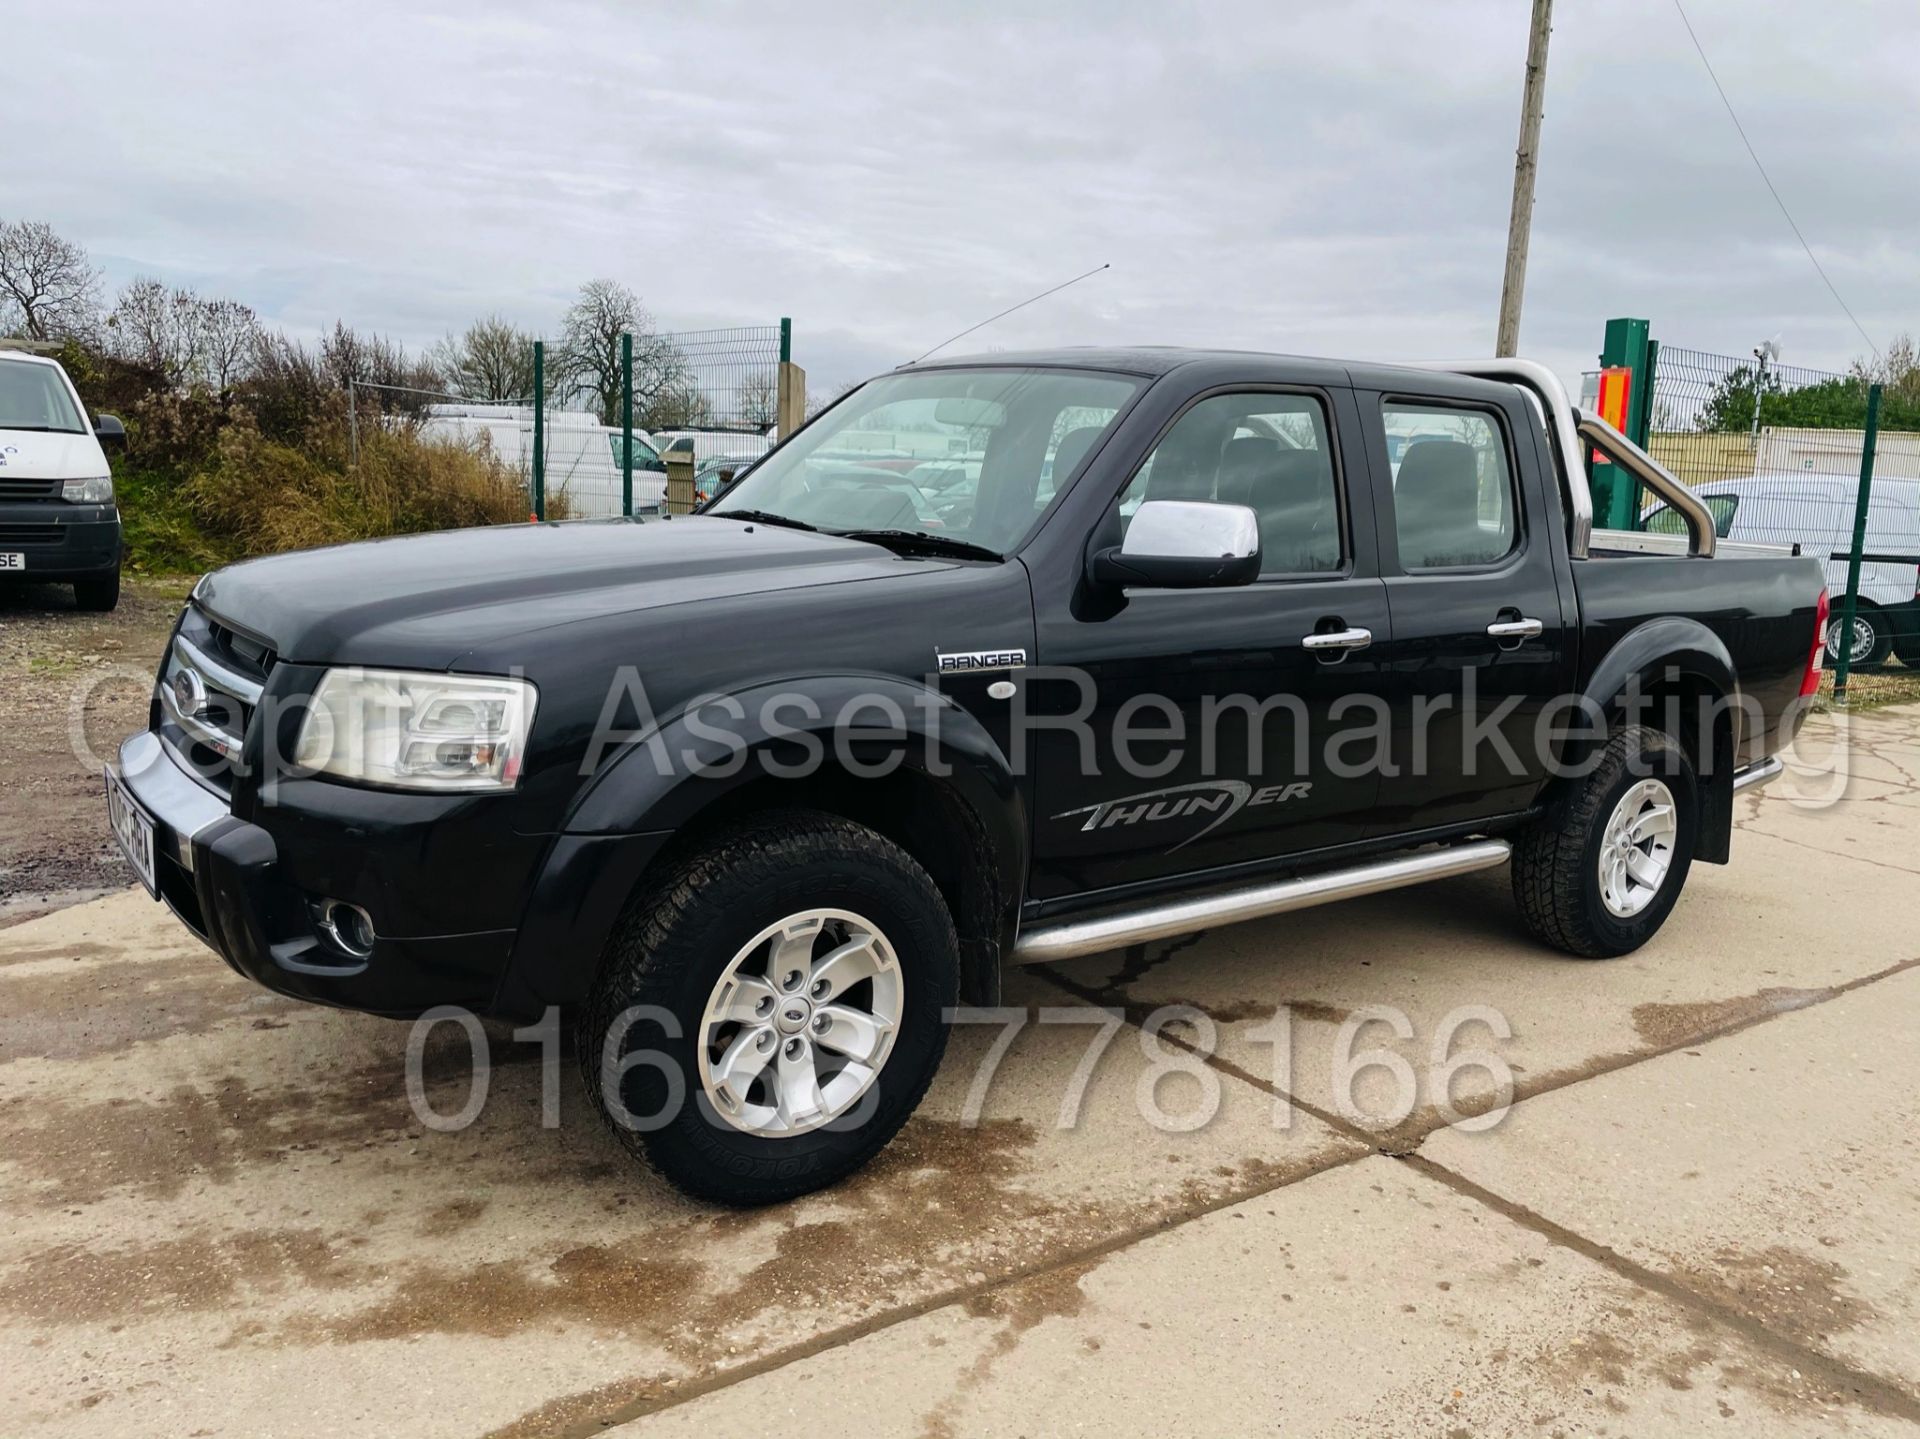 ON SALE FORD RANGER *THUNDER* DOUBLE CAB 4X4 PICK-UP (2009) '2.5 TDCI - 1 *LEATHER - A/C* (NO VAT) - Image 7 of 40